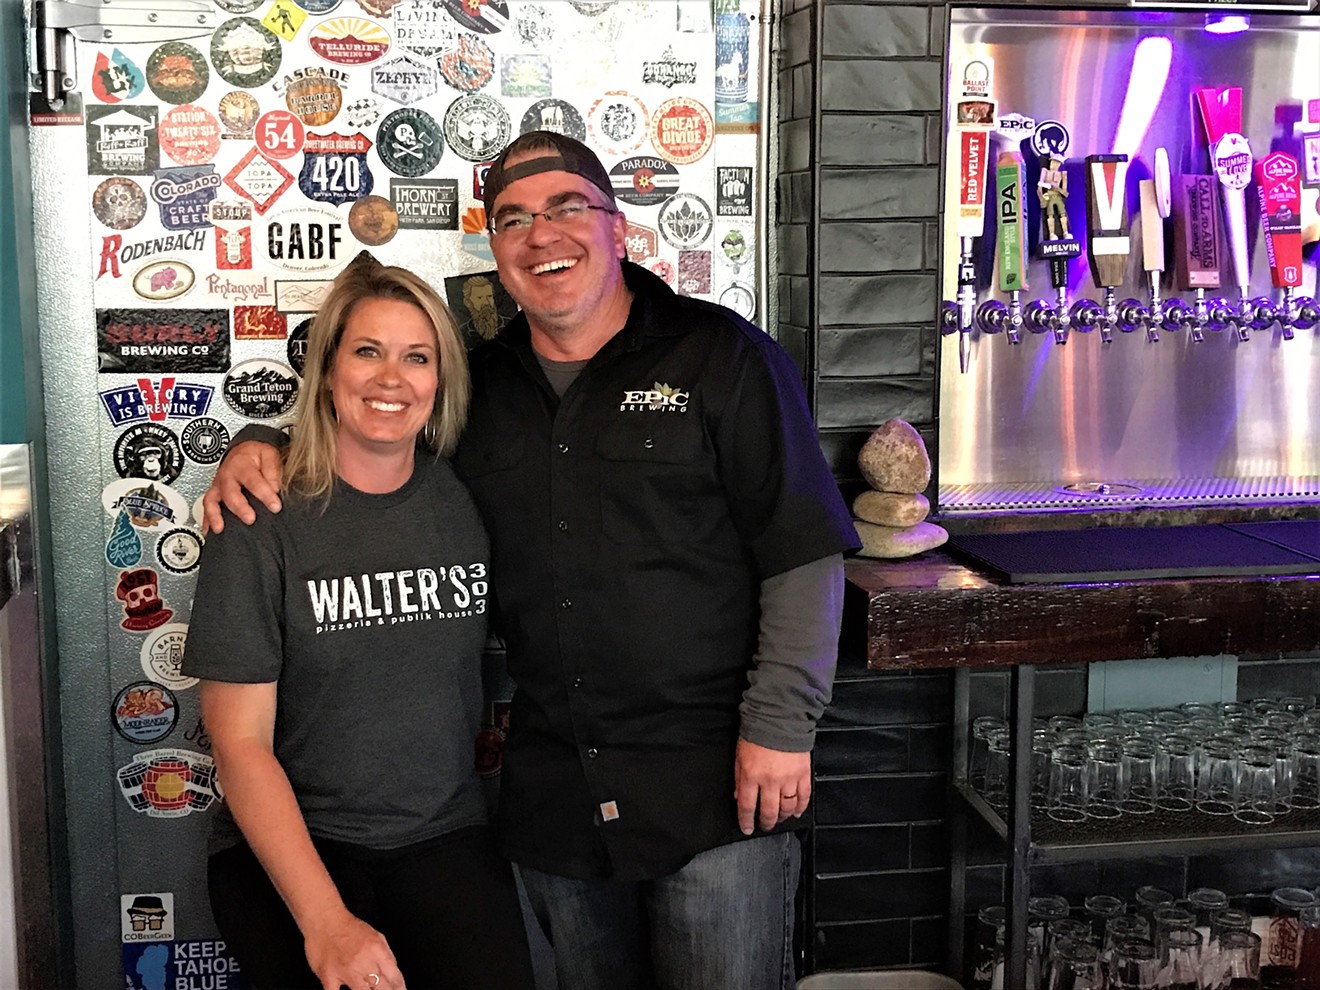 John and Stacy Turk are slinging beers at Walter's 303.